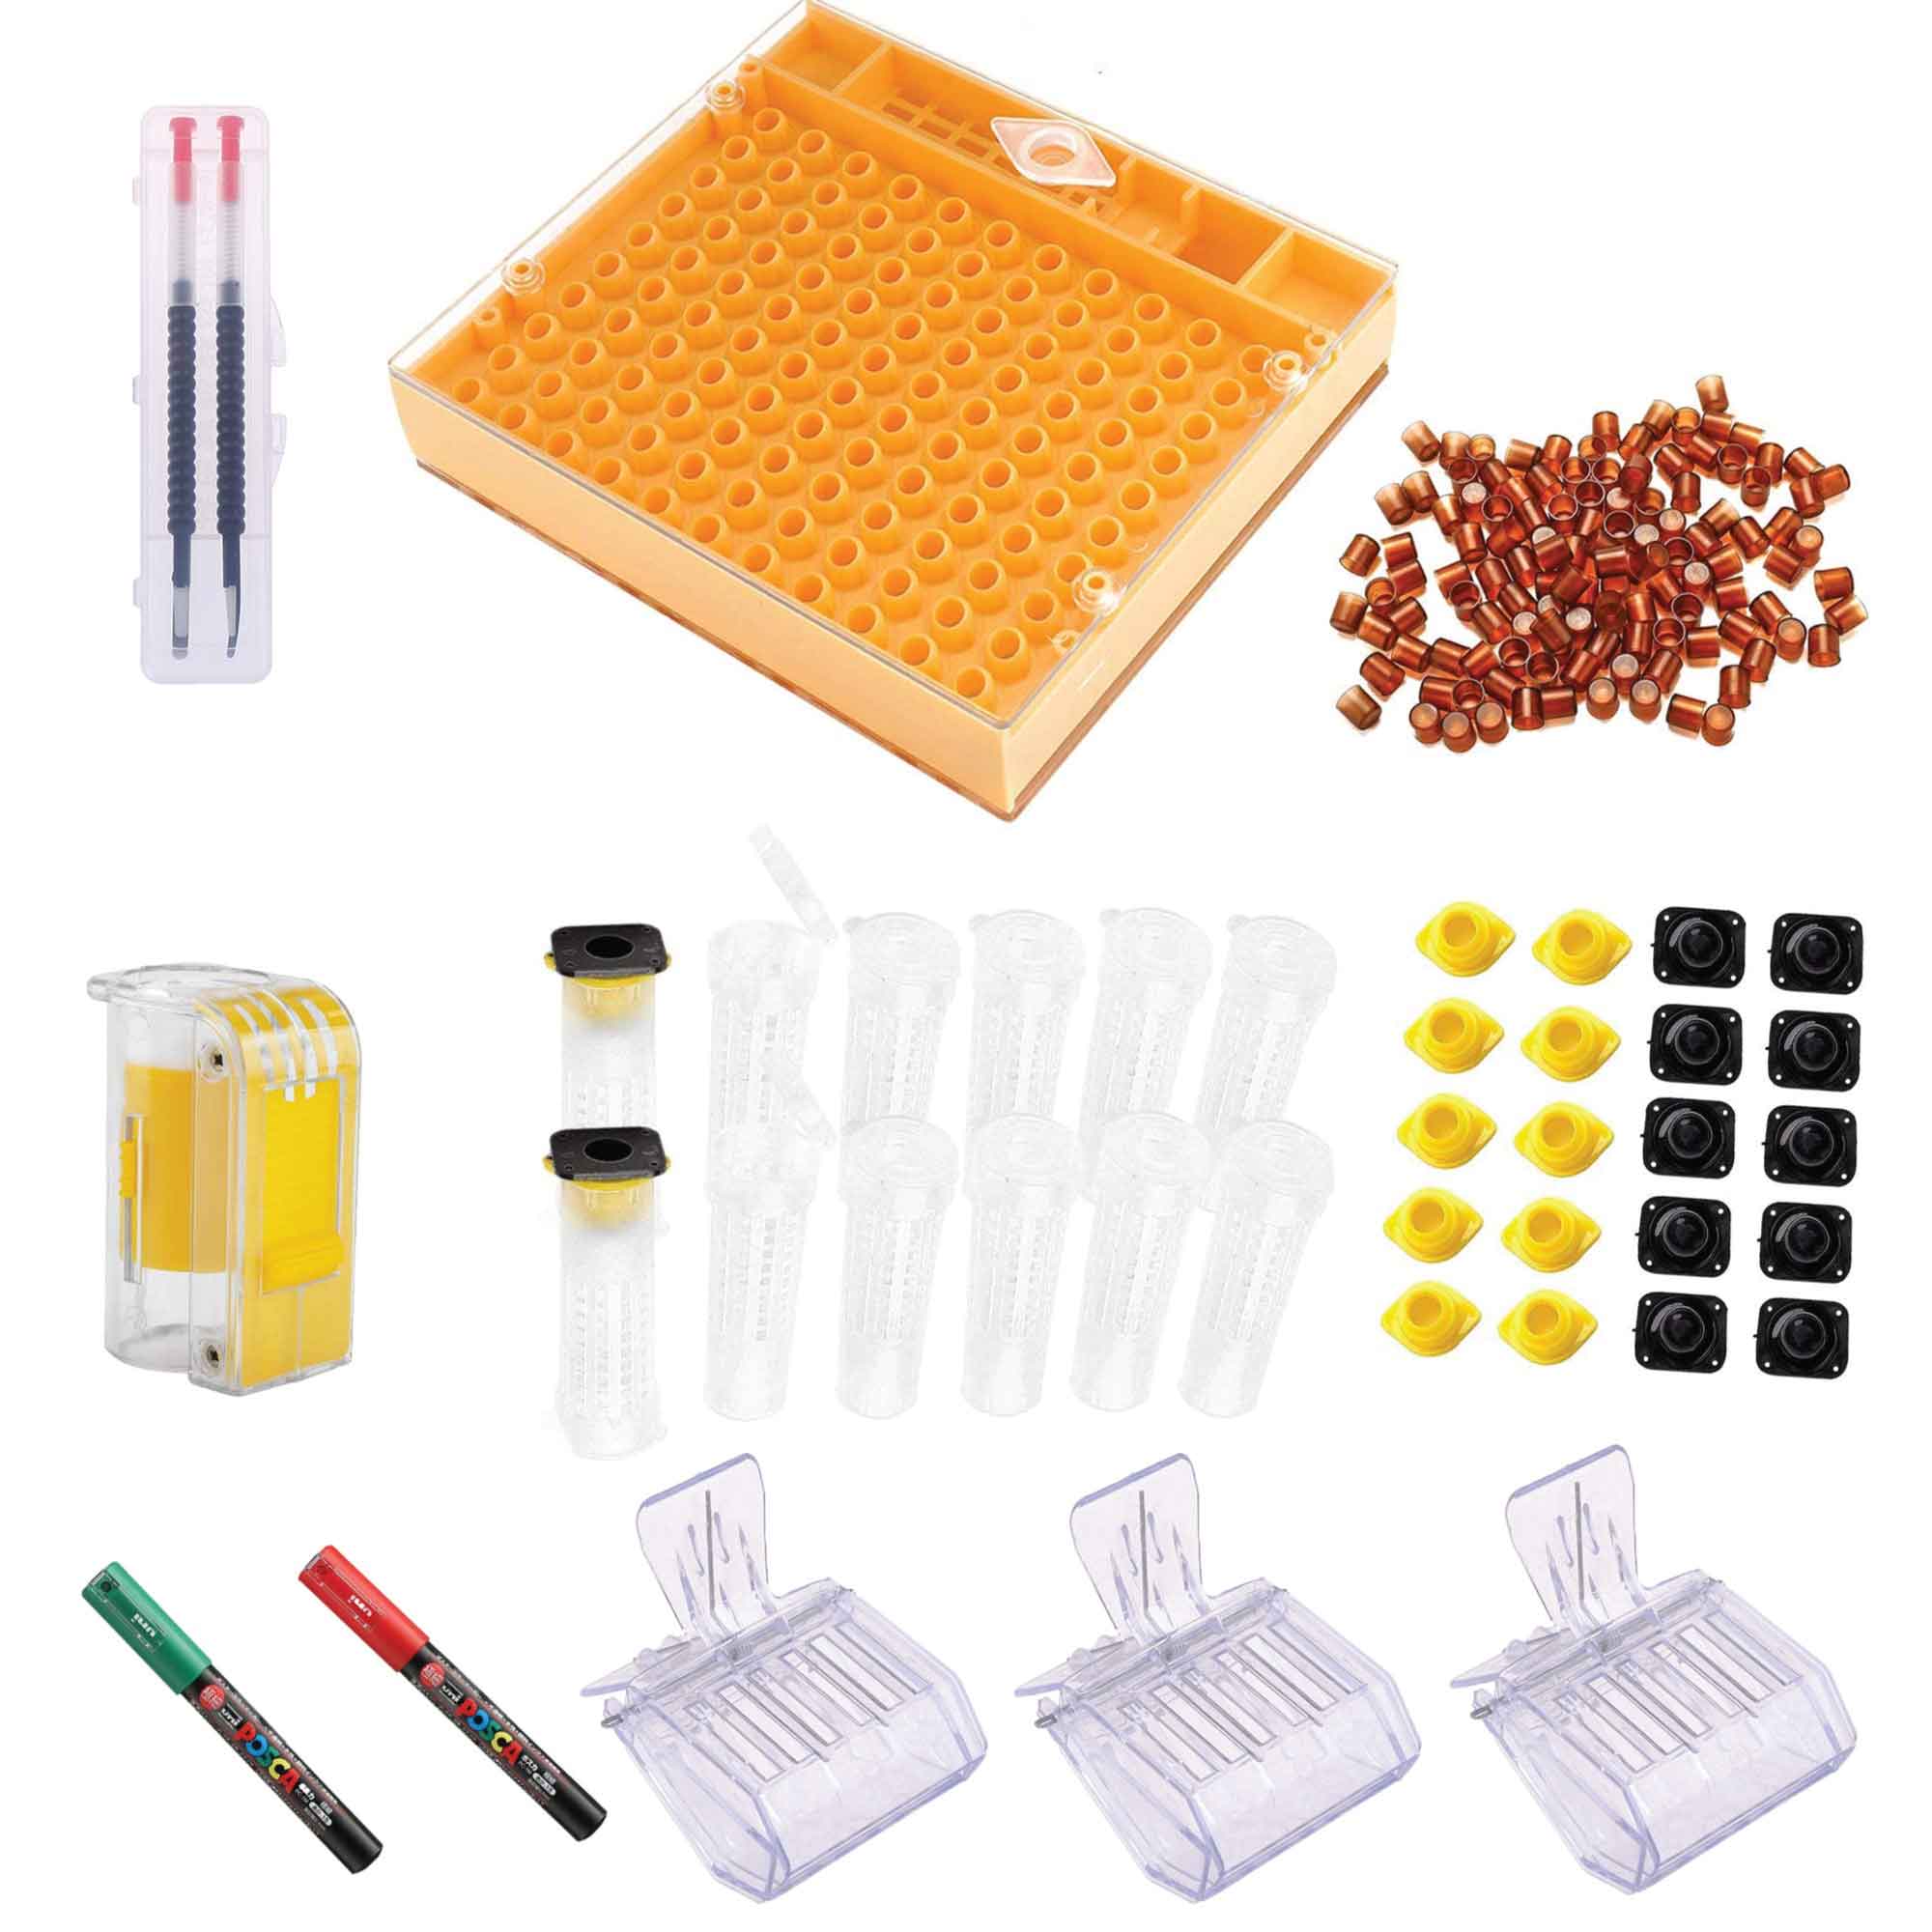 Nicot Queen Bee Rearing System Kit - Deluxe Complete Marking Starter